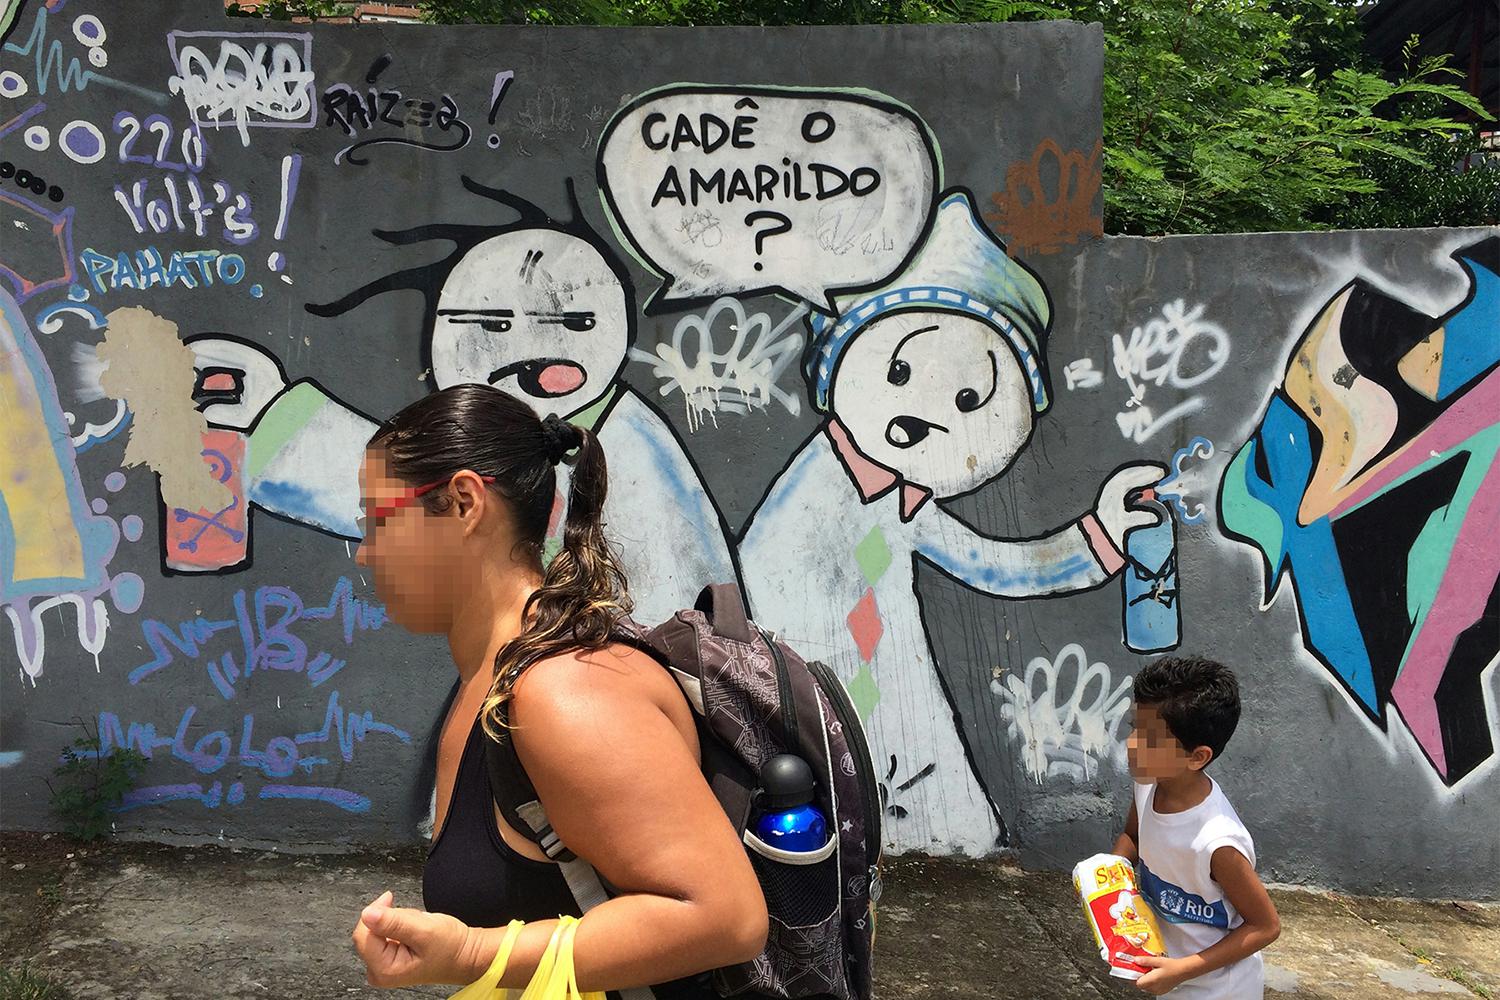 Two residents of theComplexo do Alemão favela walk on November 26, 2015 by graffiti that asks: “Where is Amarildo?” Amarildo de Souza, a 47-year-old construction laborer disappeared after police took him to the Pacifying Police Unit (UPP) at Rocinha favel